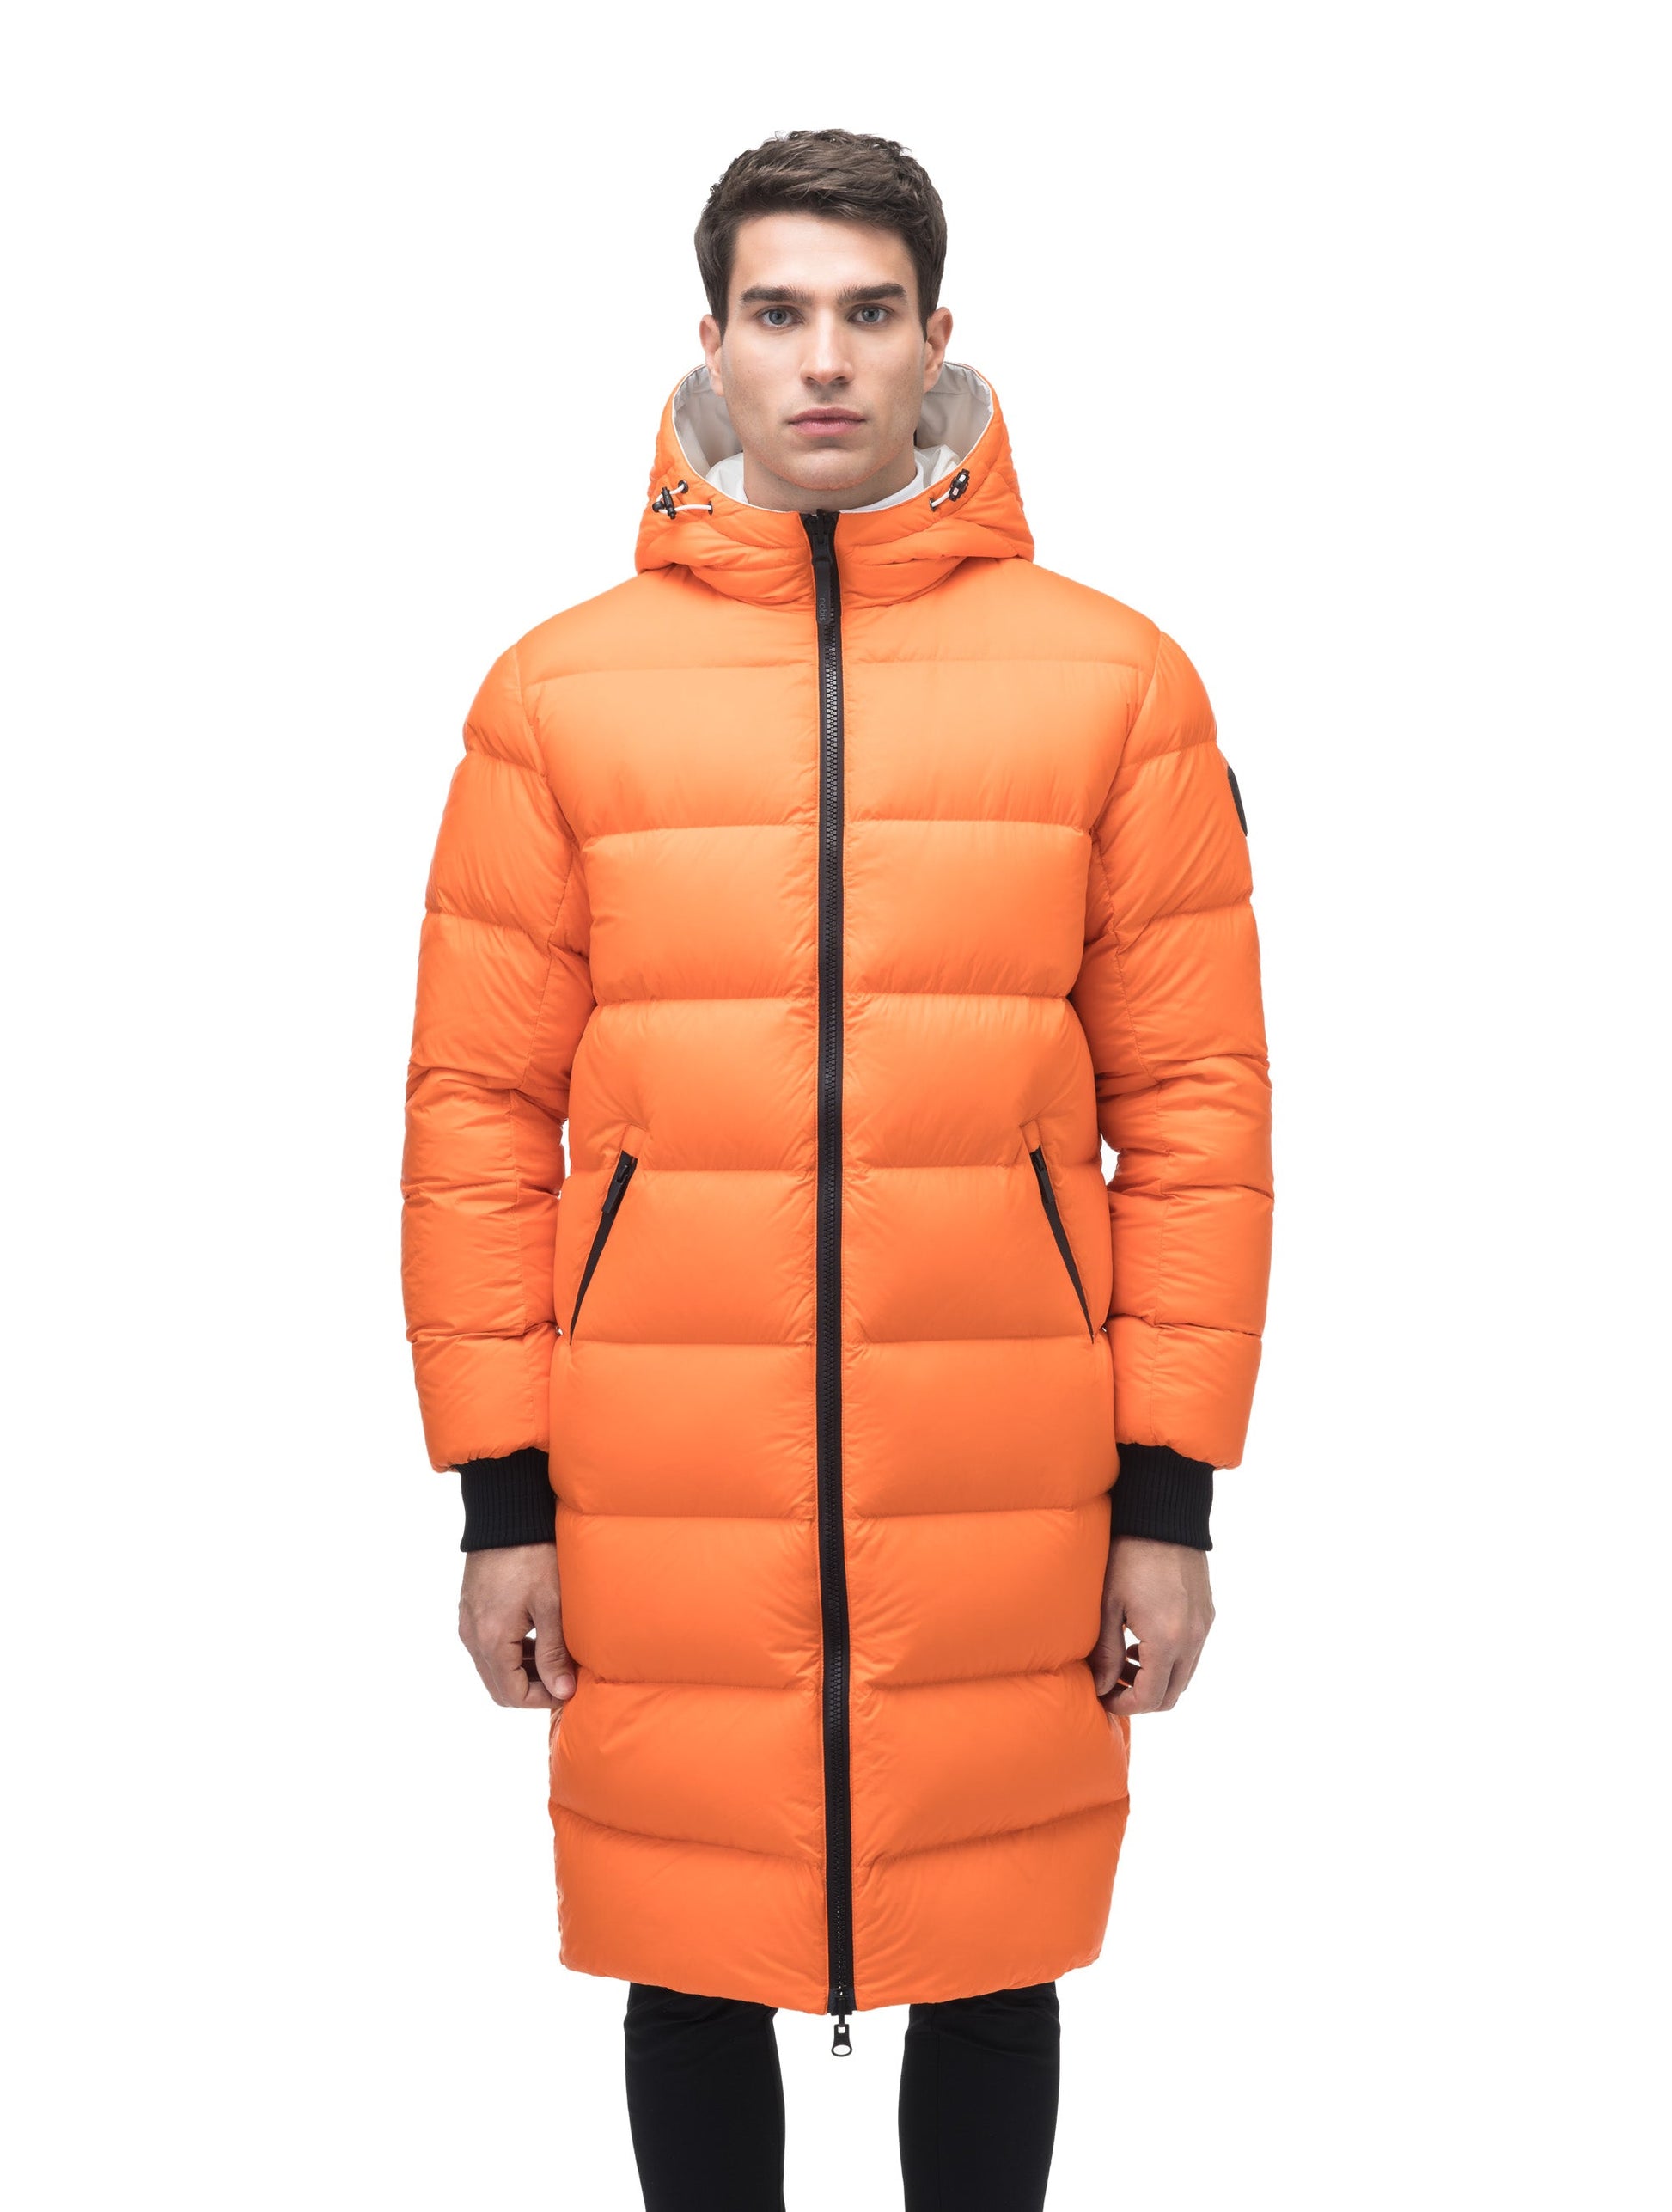 Men's knee length reversible down-filled parka with non-removable hood in Chalk/Atomic